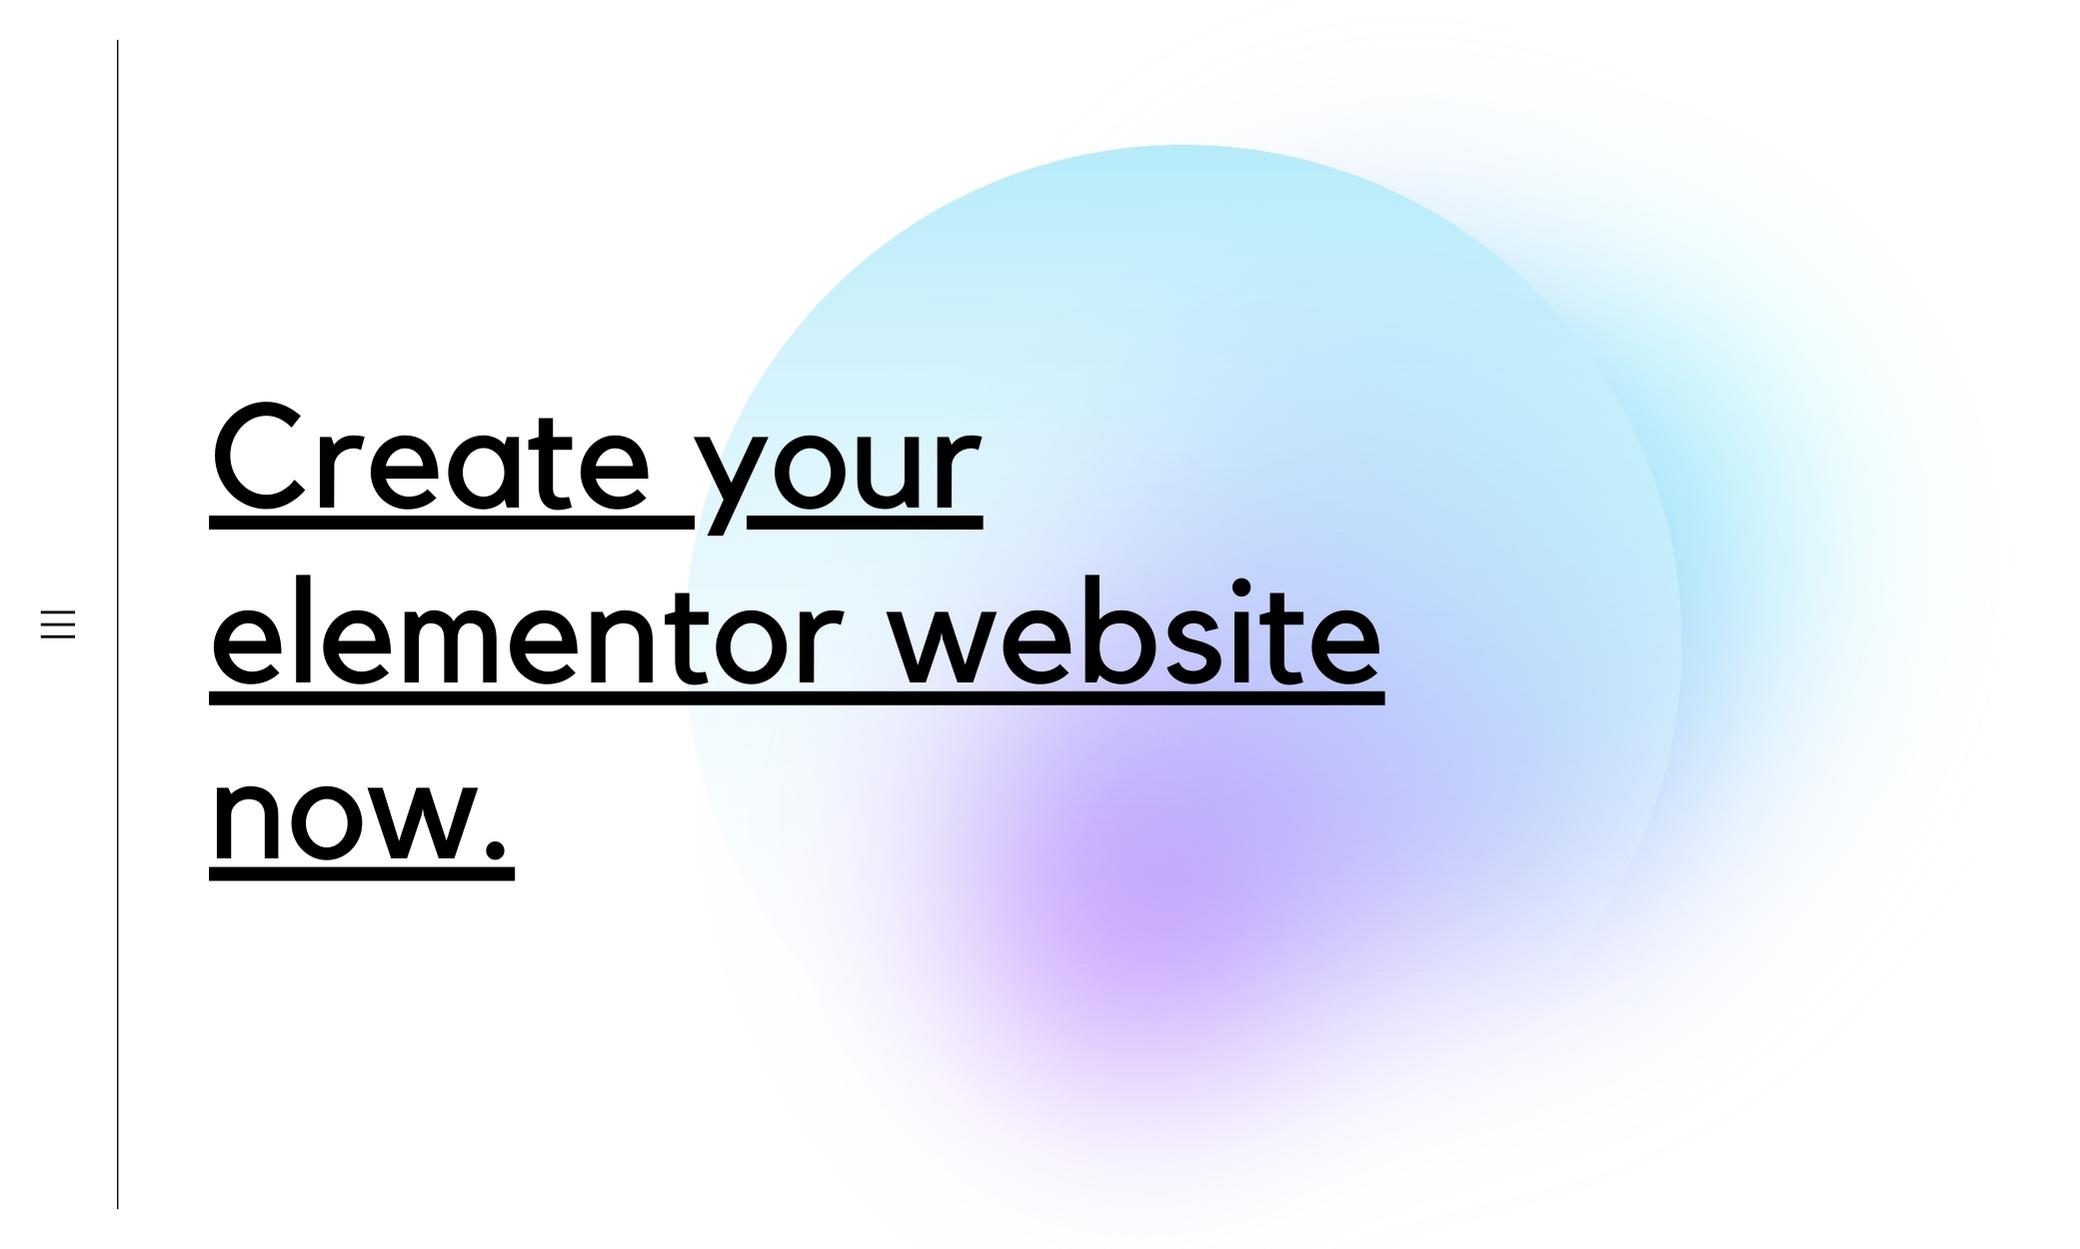 I will be your elementor expert for elementor website, FiverrBox